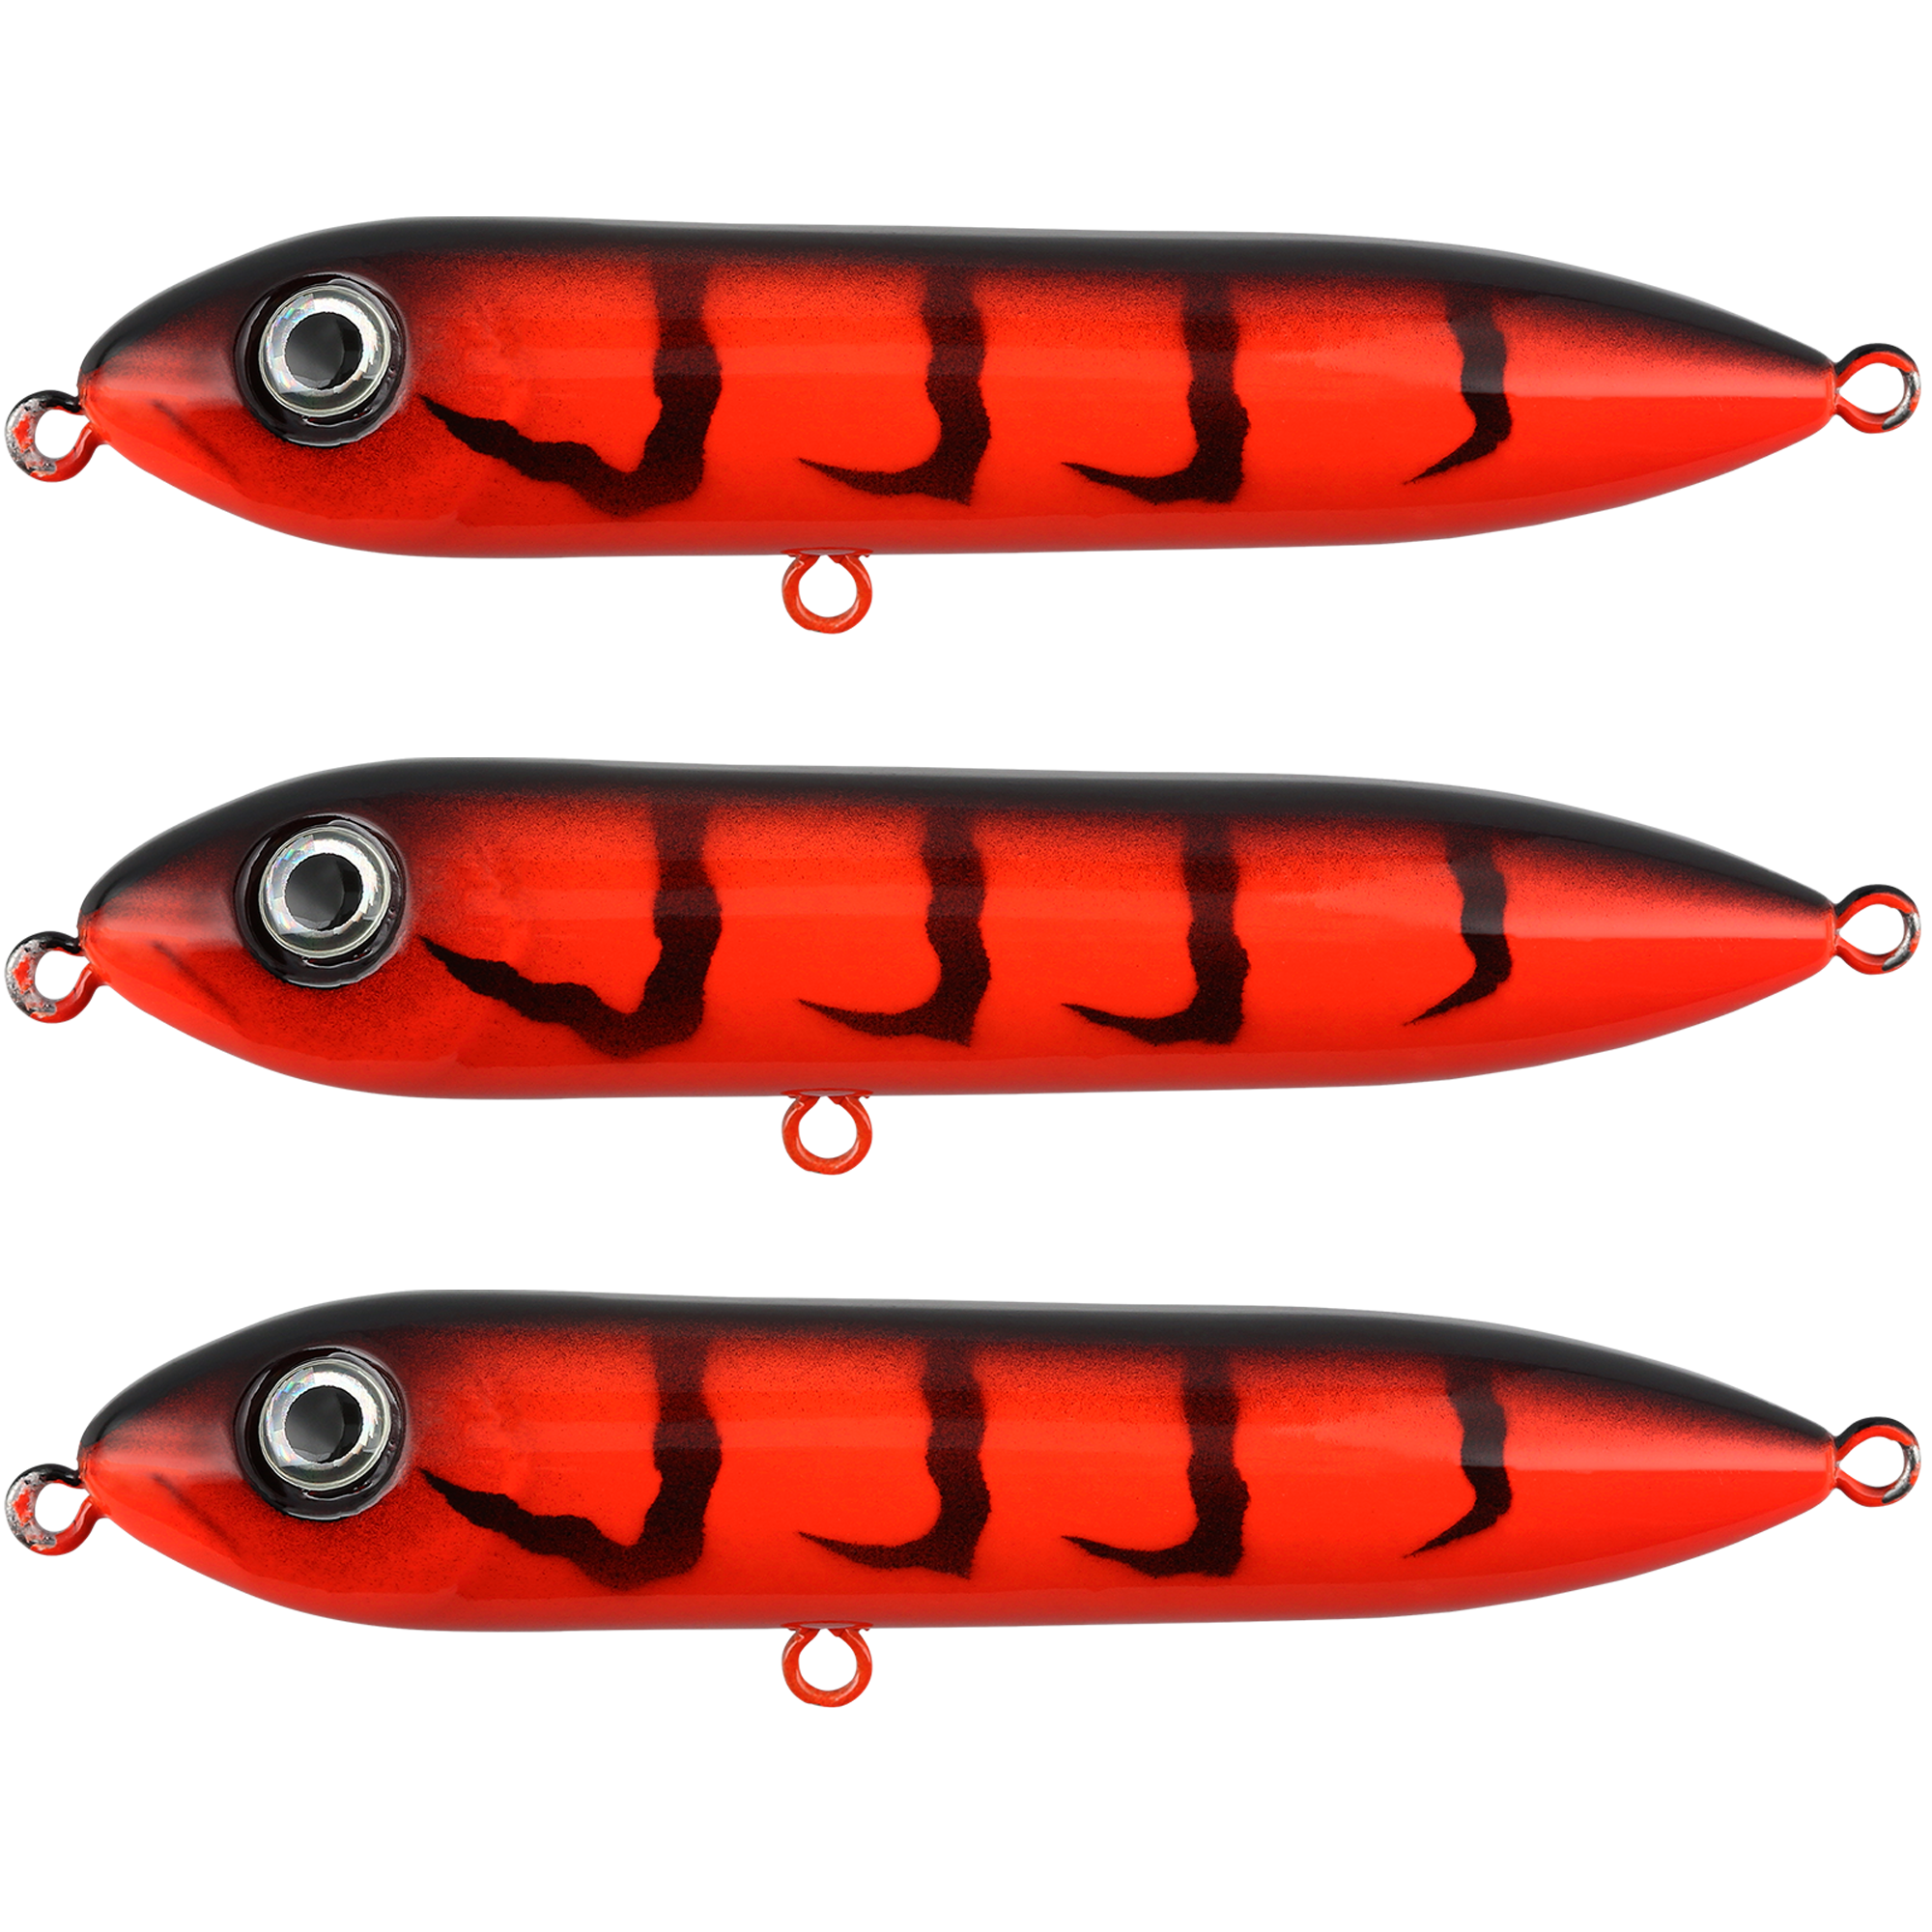 Catfish Float Rigs | Jig Tough Rattle with Sensitive Action,Fishing Lures  for Sea Fishing, Ice Fishing, Fly Fishing, Bass Fishing, Trout Fishing